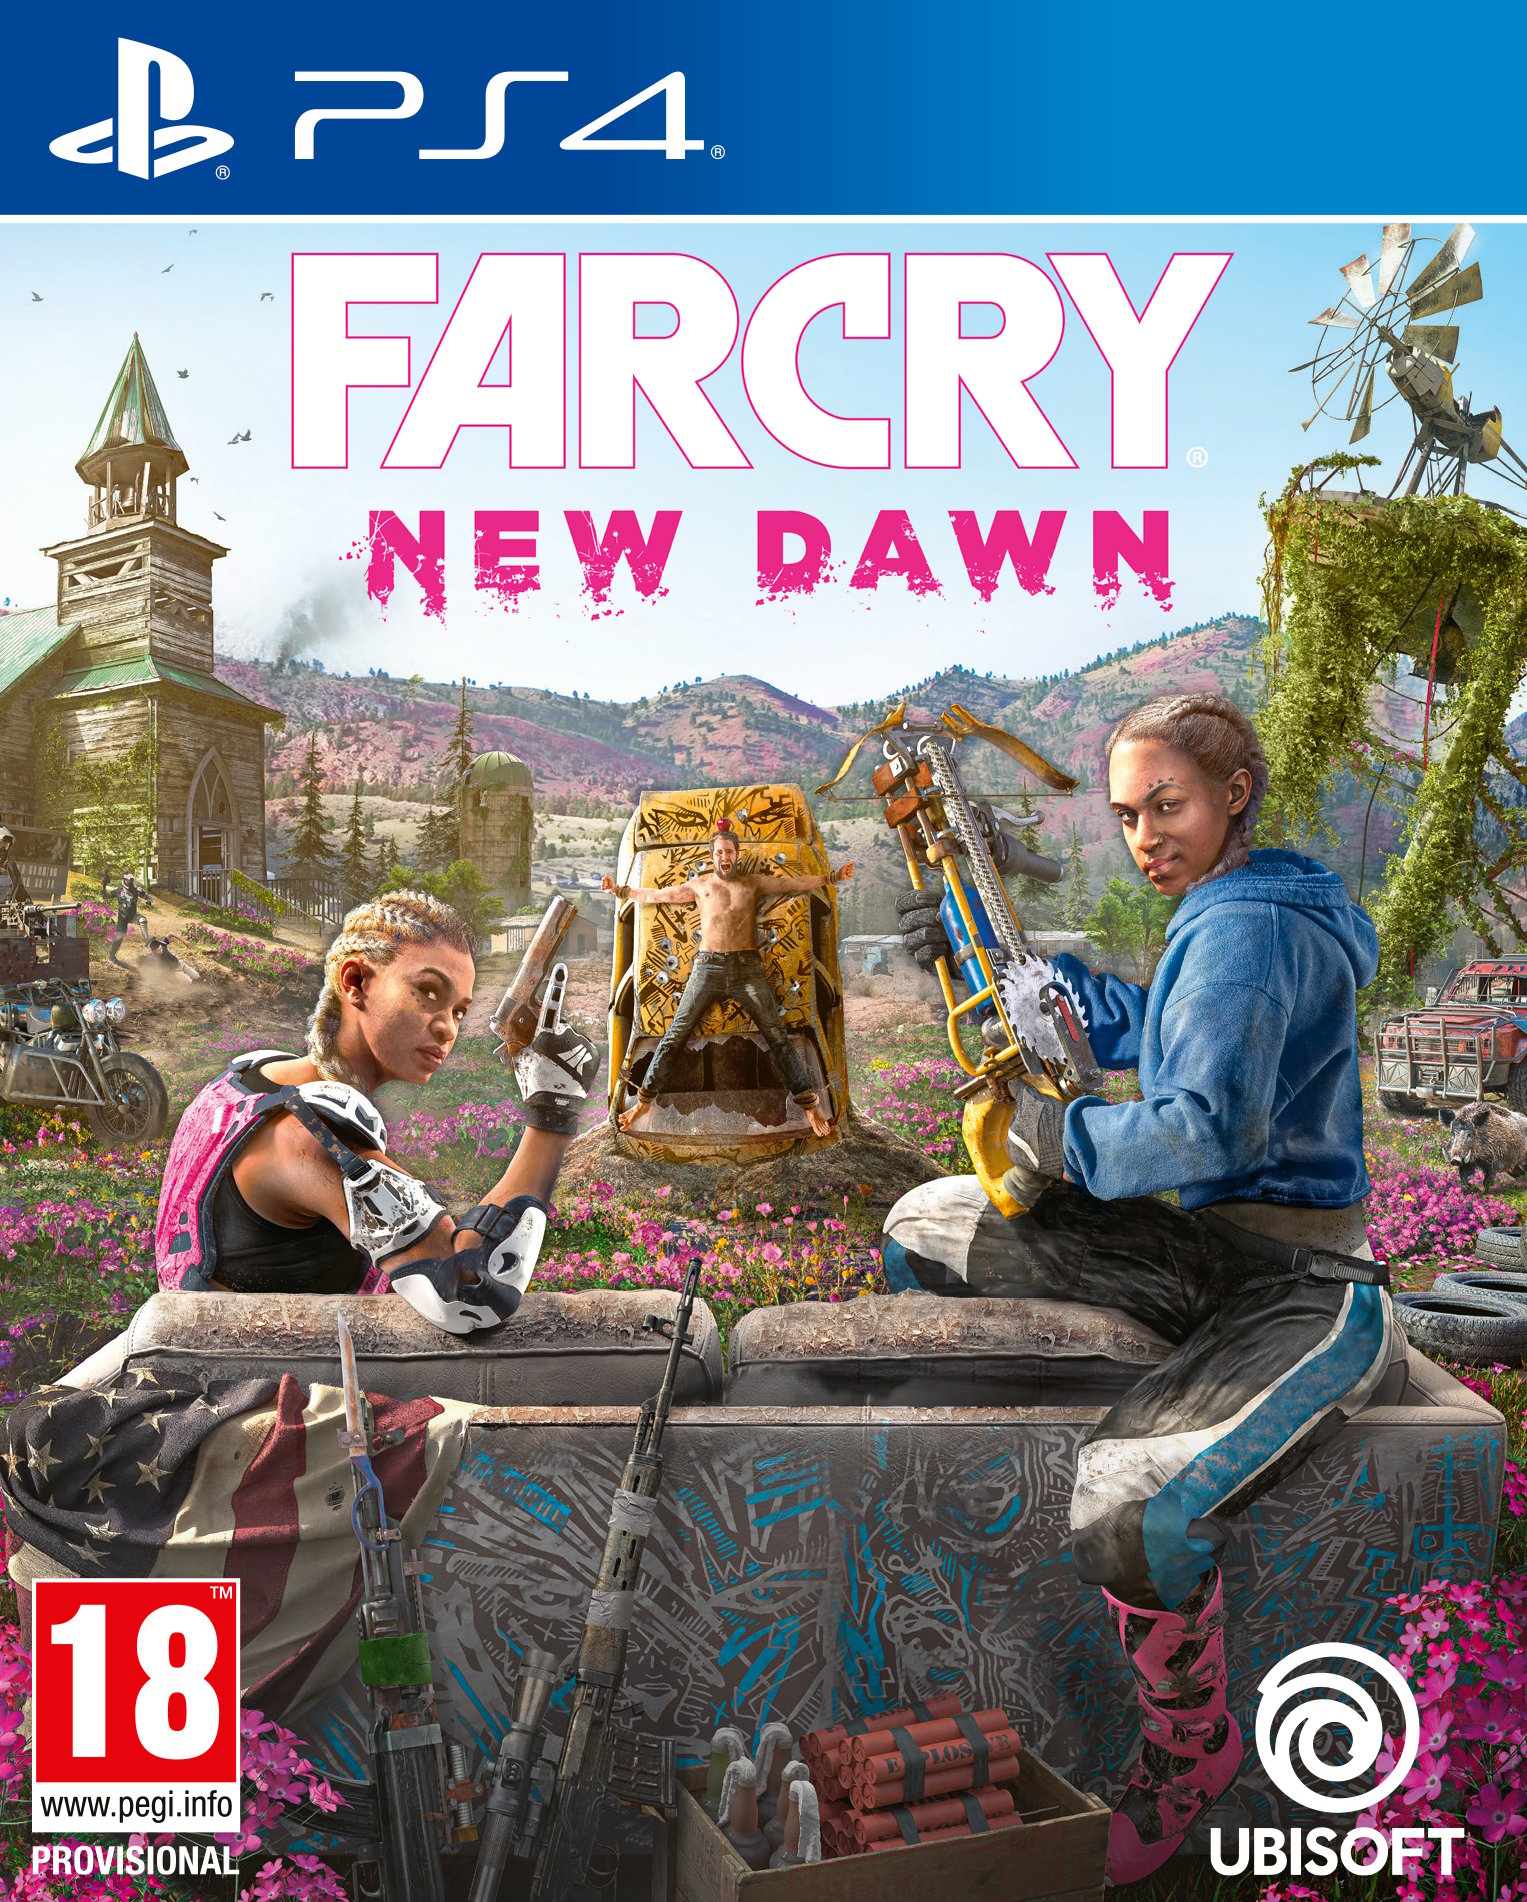 download free far cry new dawn ps5